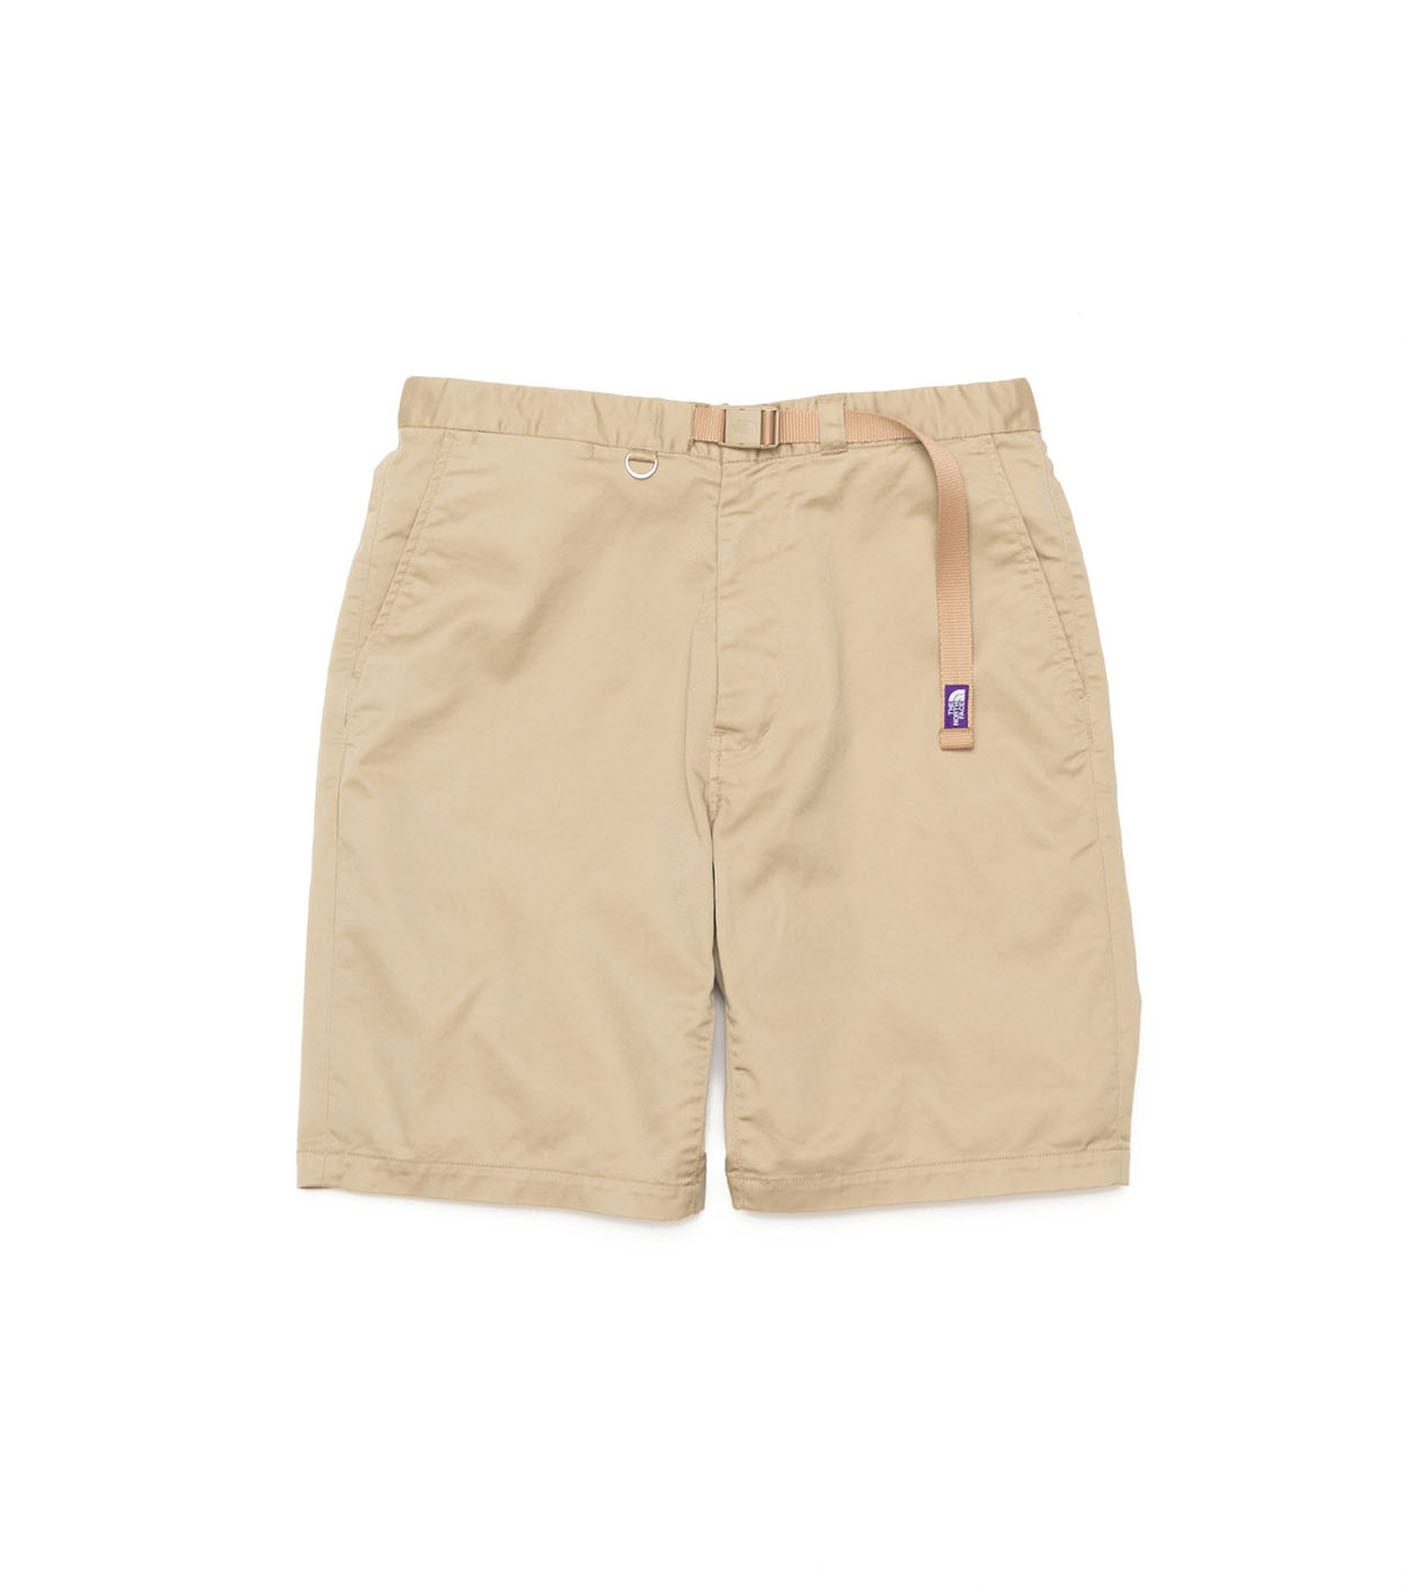 THE NORTH FACE PURPLE LABEL Stretch Twill Shorts NT4301N BE(Beige